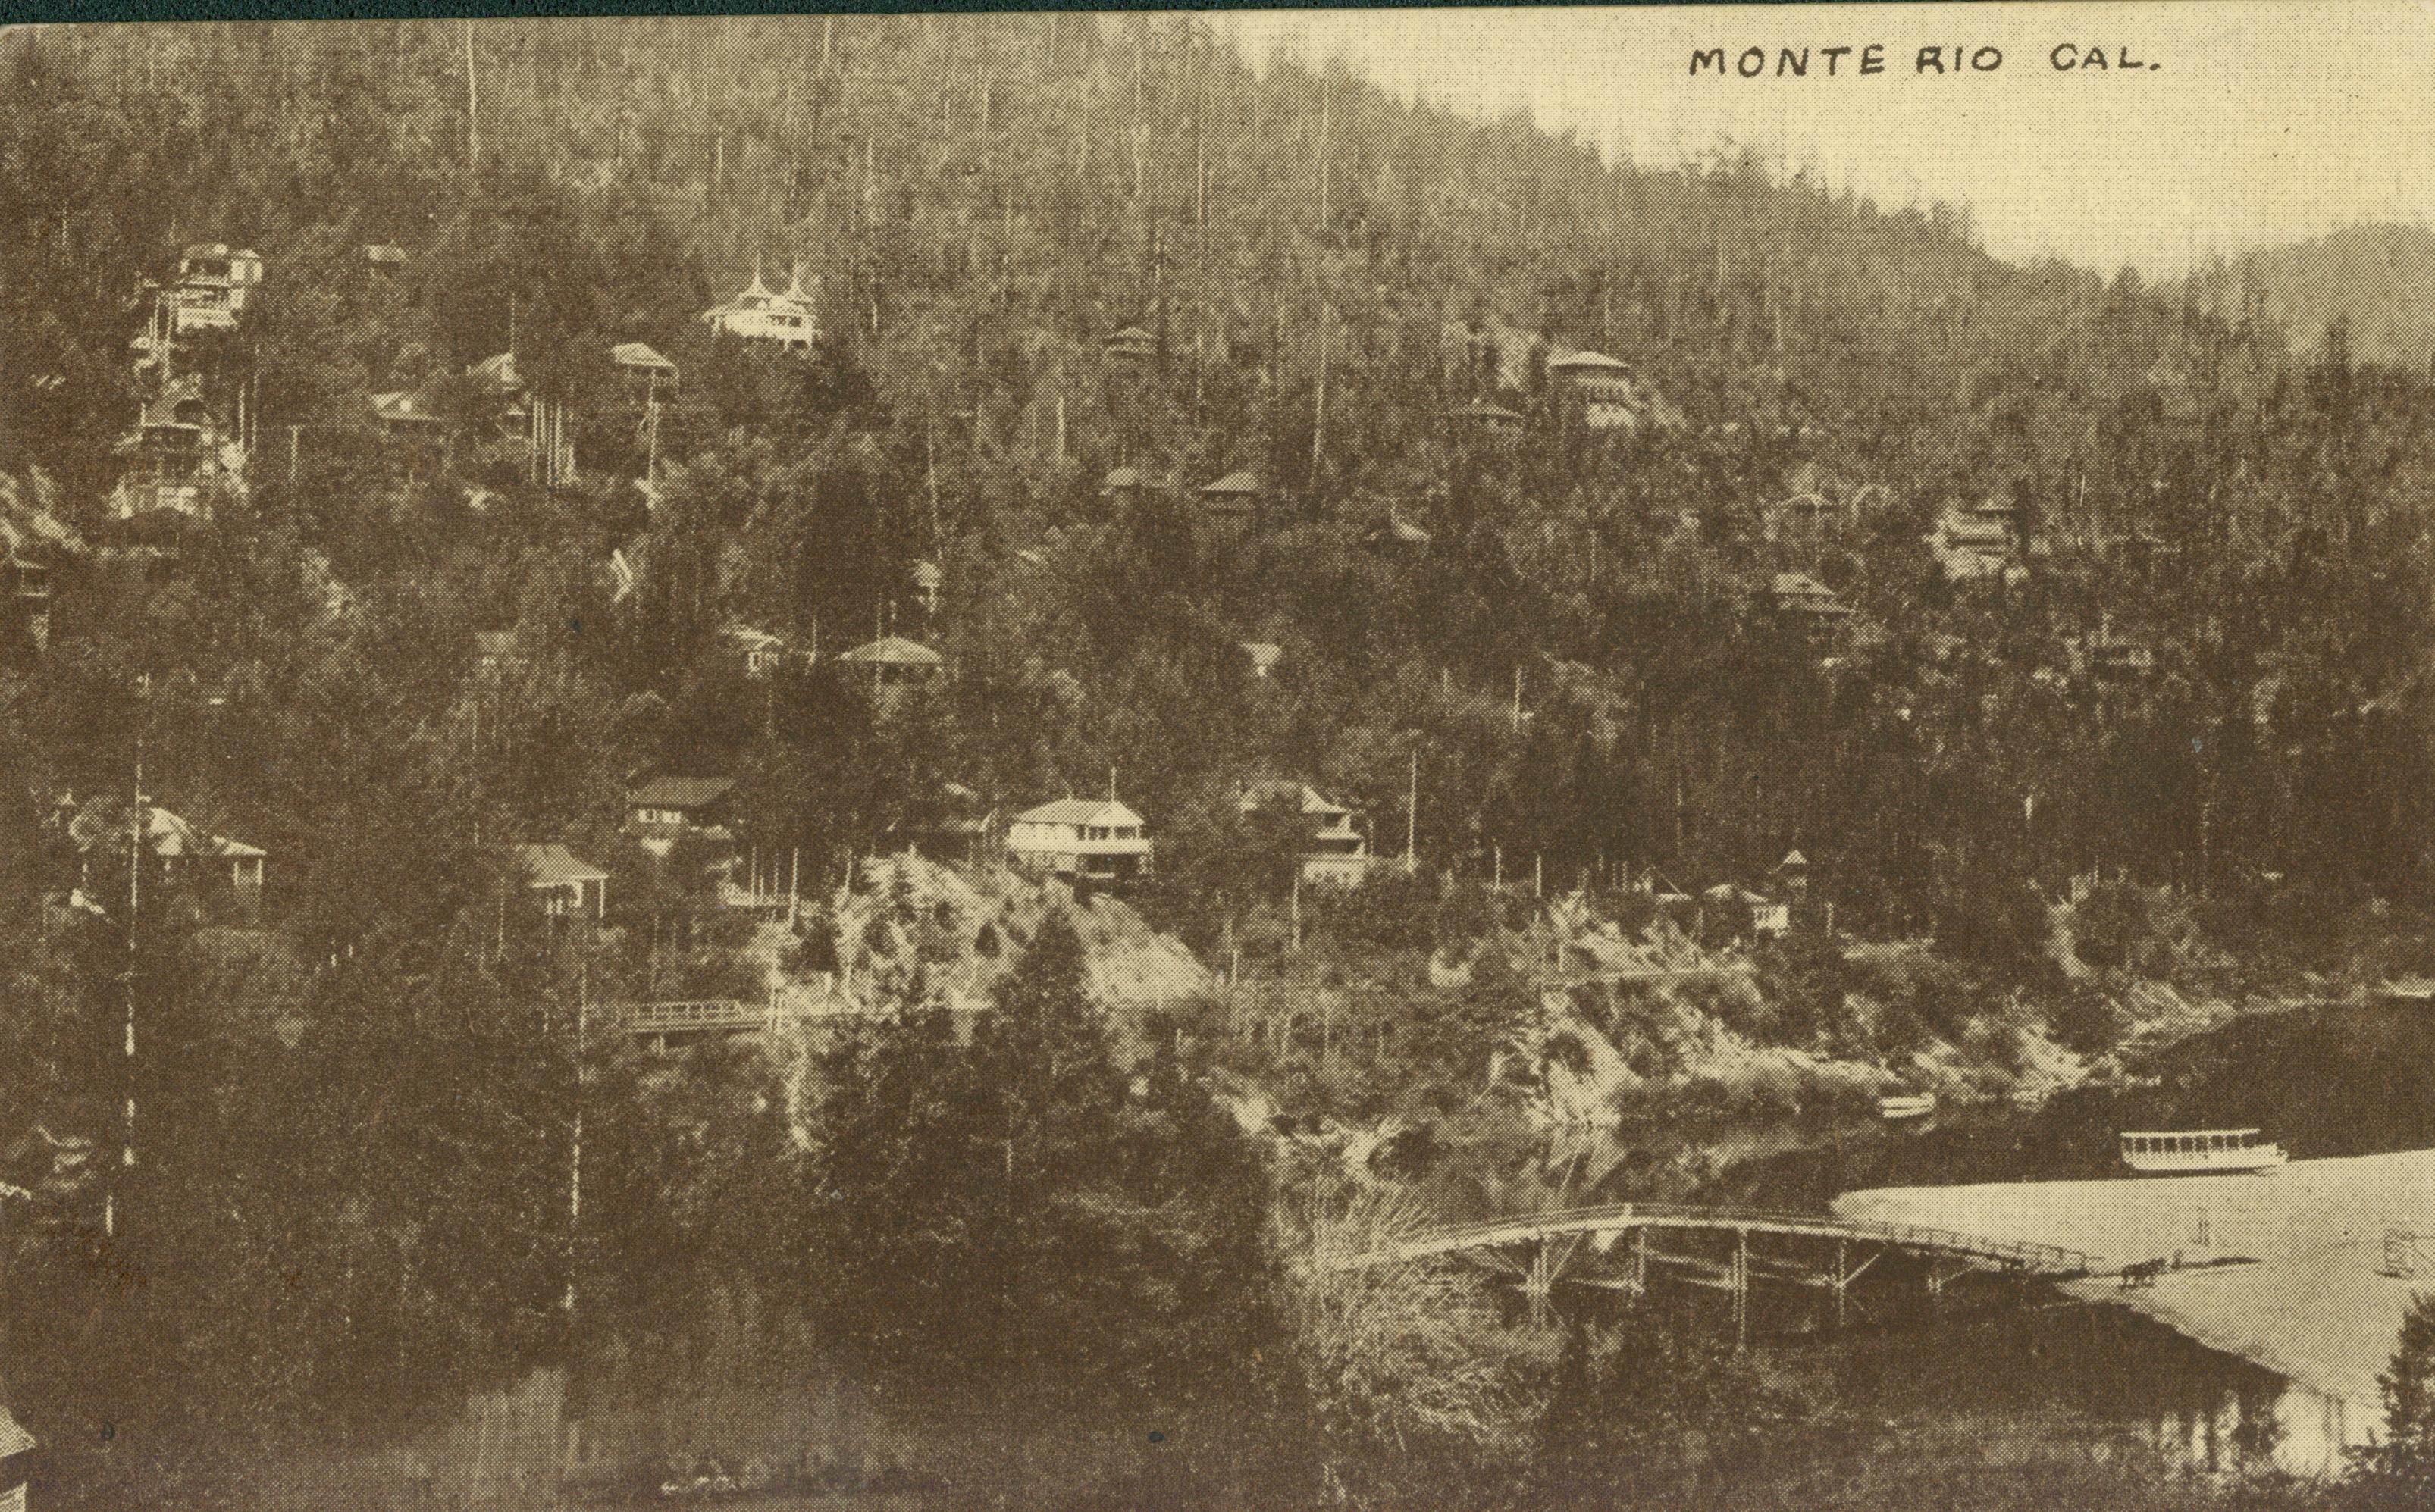 Shows a view of Monte Rio with building nestled in and amongst trees